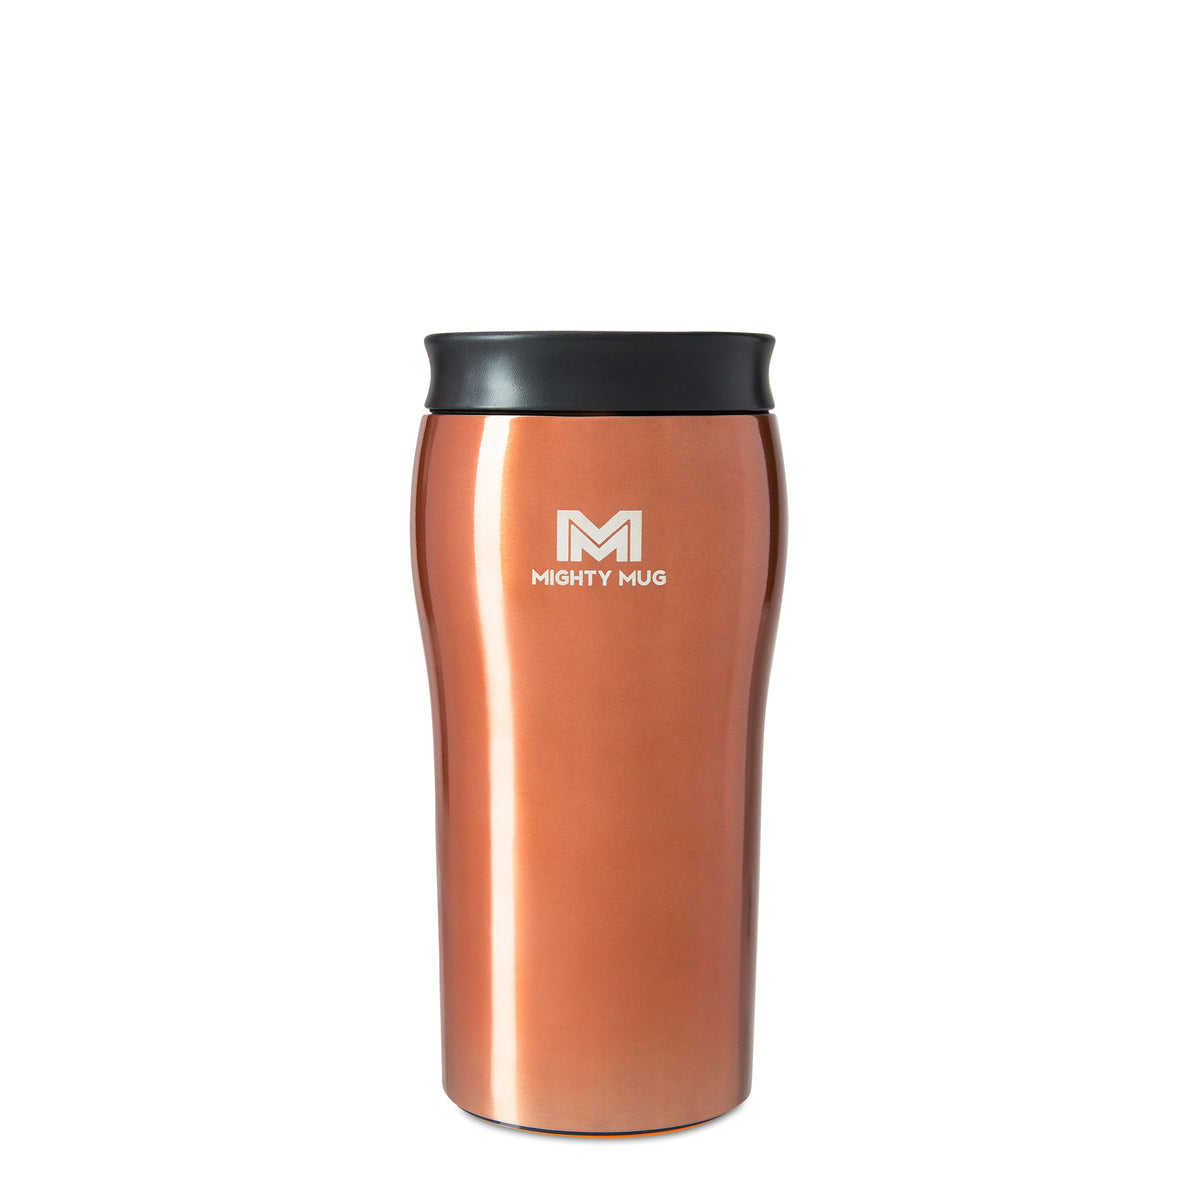 Mighty Mug Solo Travel Car Spill Proof Insulated Thermos Cup 320ml BPA Free